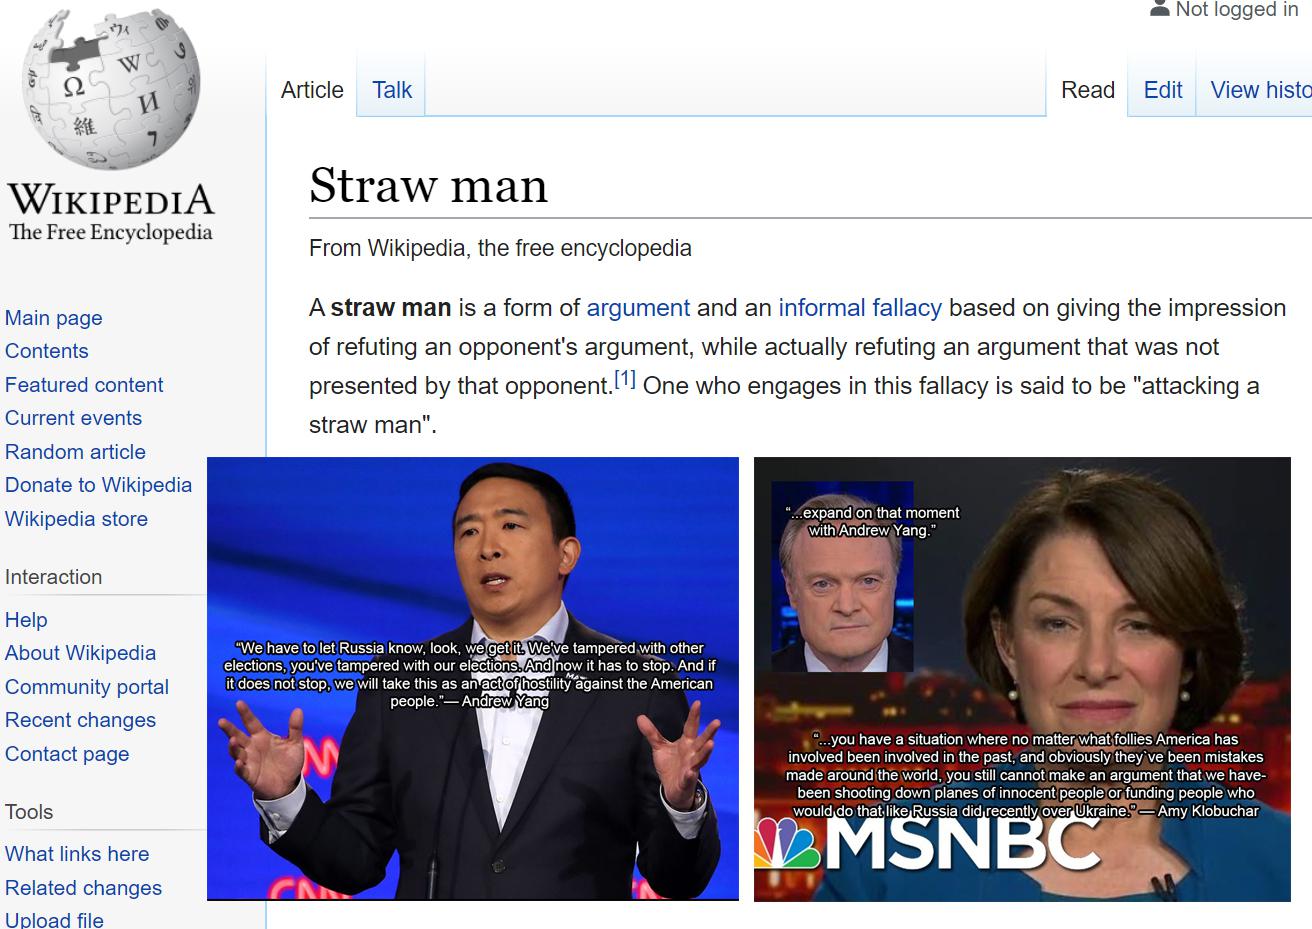 trump yang-memes trump text: Not logged in Article Talk Read Edit View histo WIKIPEDIA The Free Encyclopedia Main page Contents Featured content Current events Random article Donate to Wikipedia Wikipedia store Interaction Help About Wikipedia Community portal Recent changes Contact page Tools What links here Related changes UDIoad file Straw man From Wikipedia, the free encyclopedia A straw man is a form of argument and an informal fallacy based on giving the impression of refuting an opponent's argument, while actually refuting an argument that was not presented by that opponent.[l] One who engages in this fallacy is said to be 